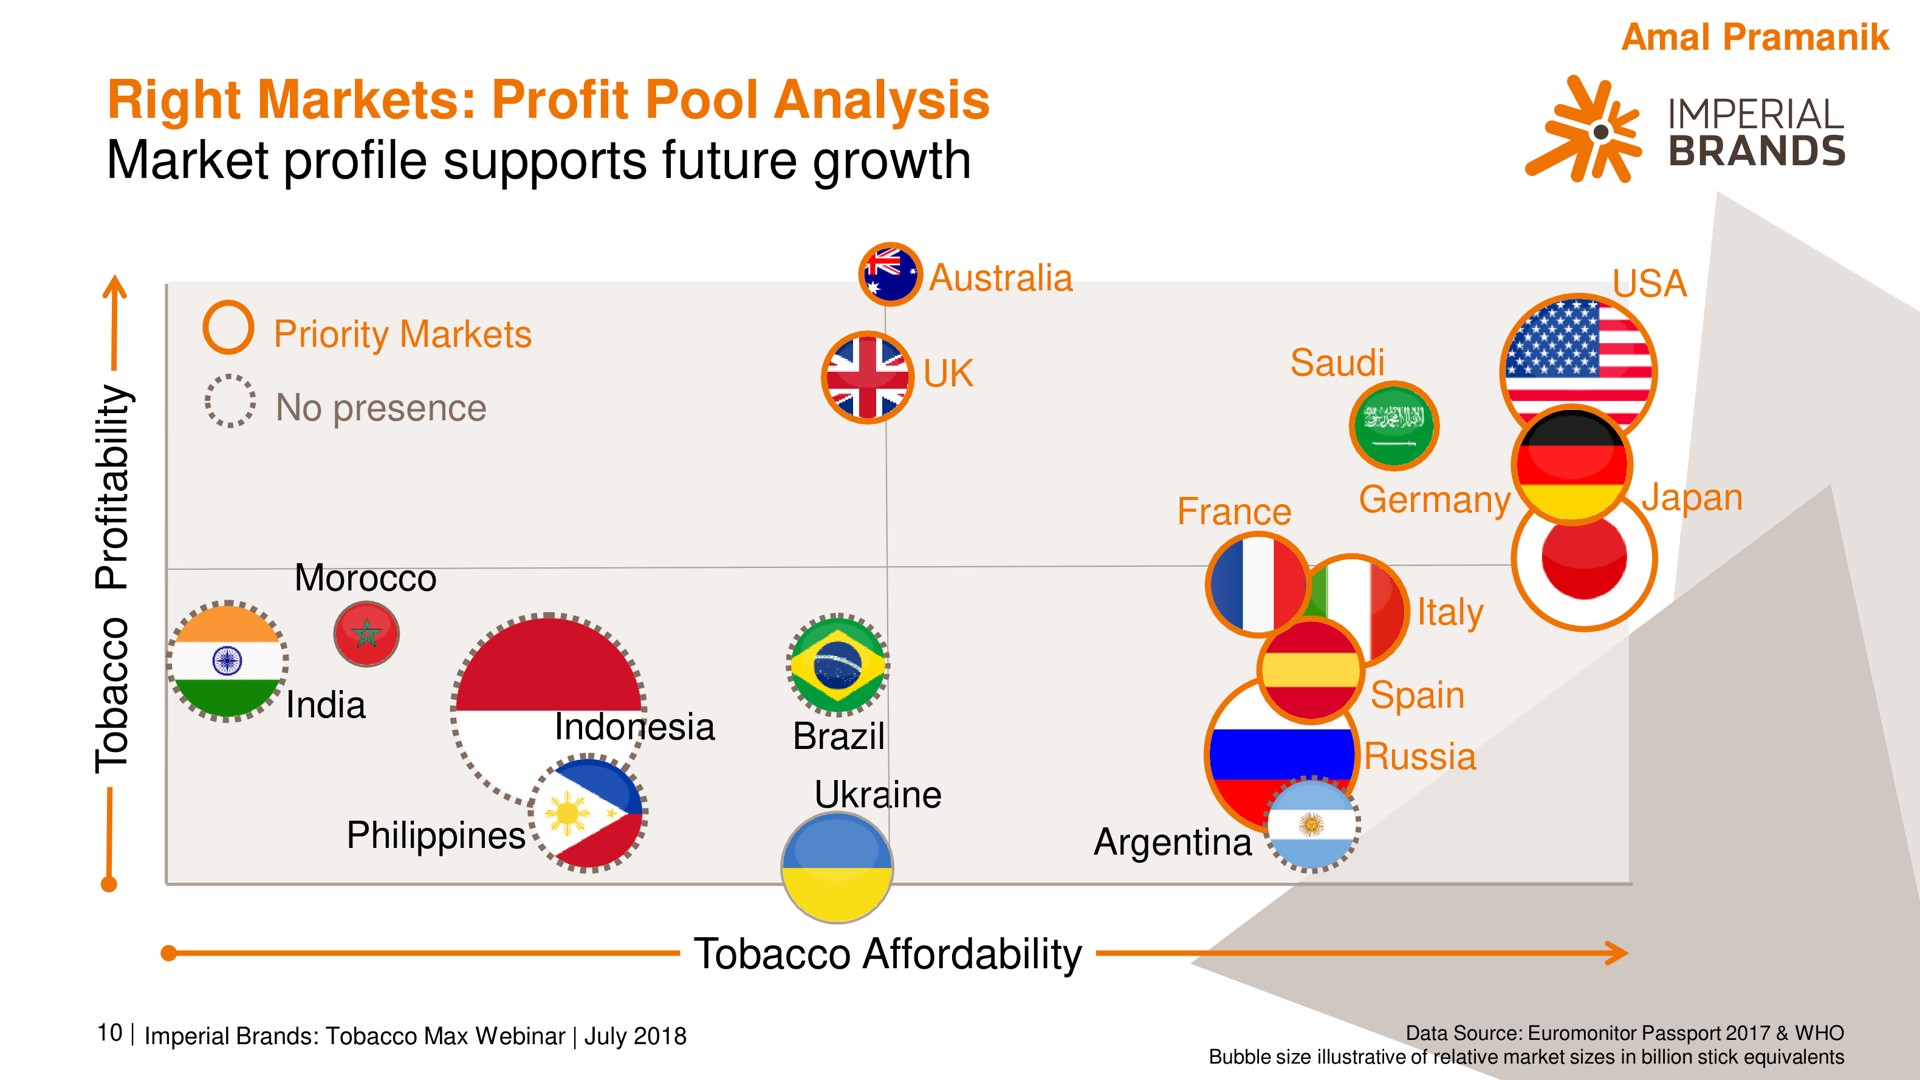 right markets profit pool analysis market profile supports future growth imperial brands | Imperial Brands